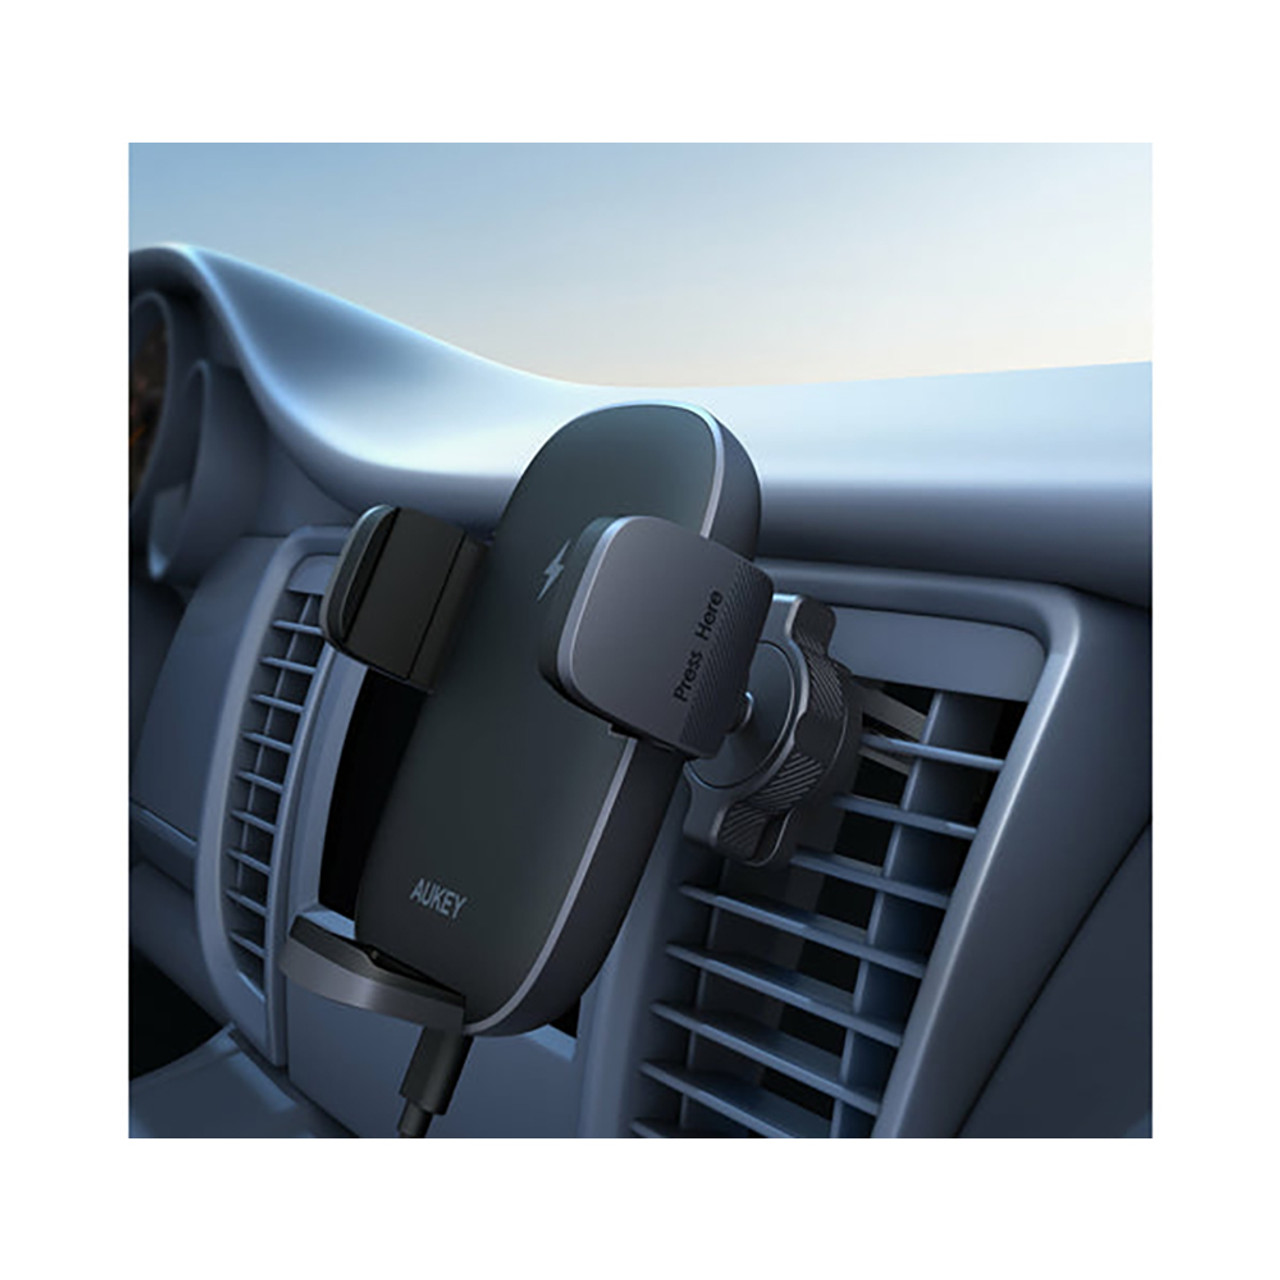 AUKEY® HD C60 Car Vent Mount with Built-in Wireless Charger product image